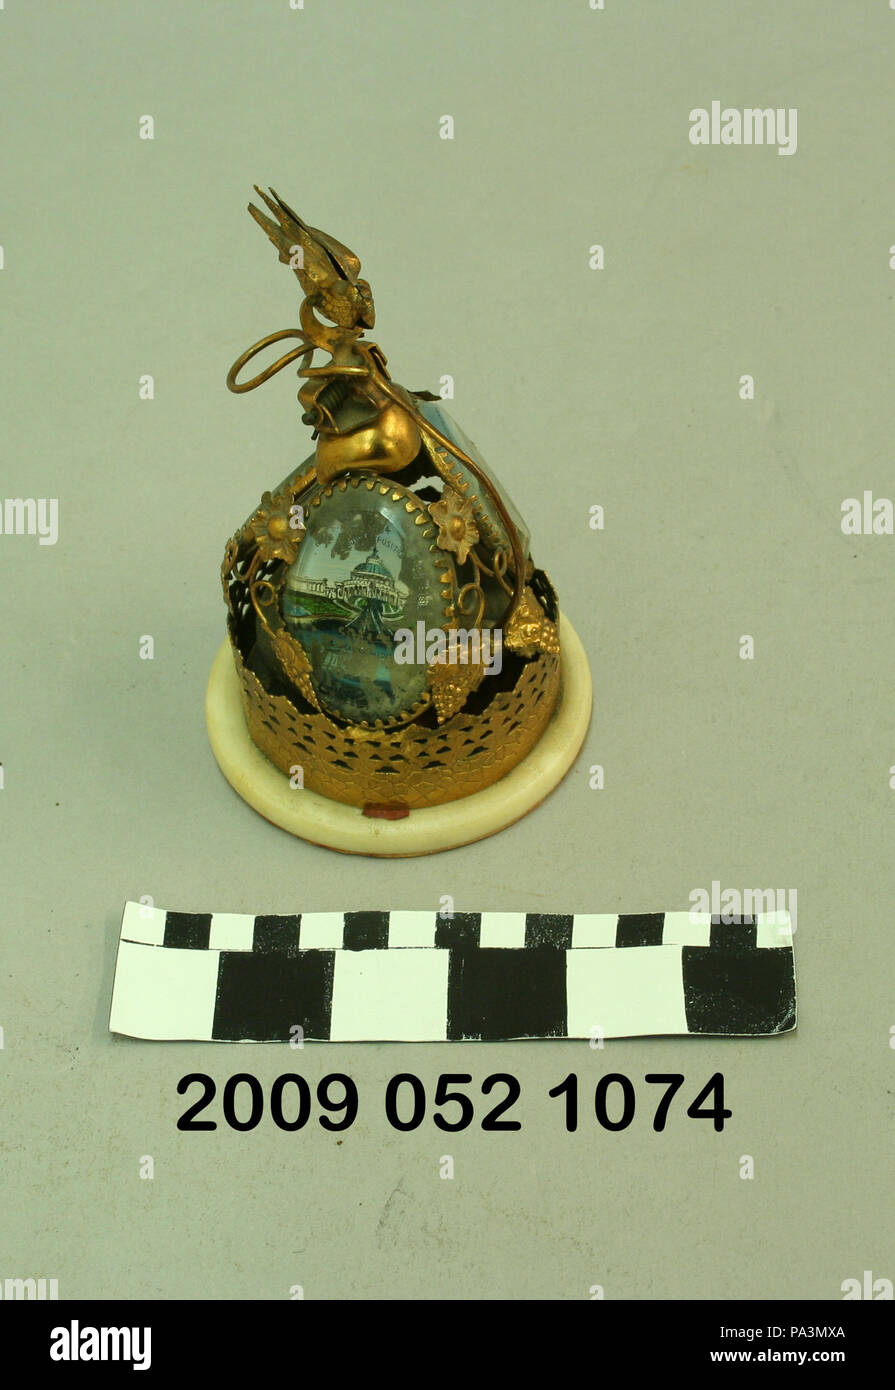 386 Desk Bell With Glass Ovals With Color Images of the Cascade Gardens, Fine Arts Building, U.S. Government Building Stock Photo